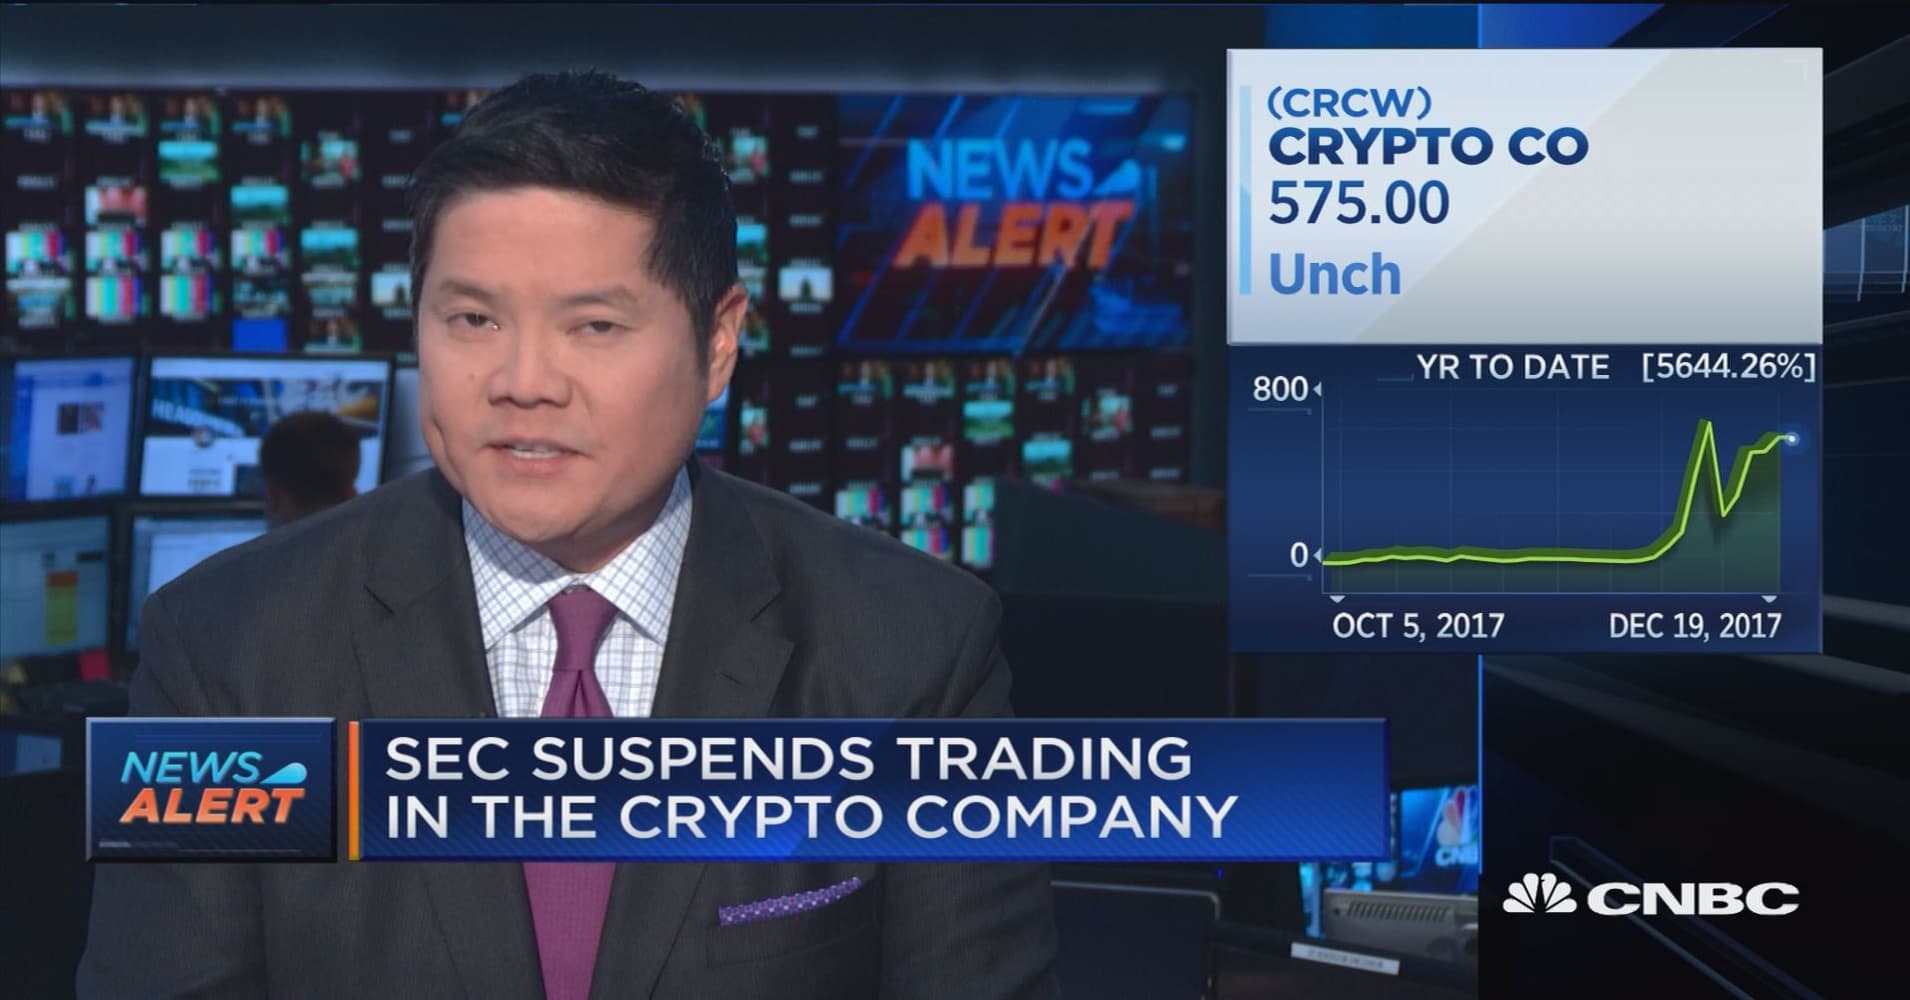 Sec suspends trading in crypto company why are the cryptocurrencies falling